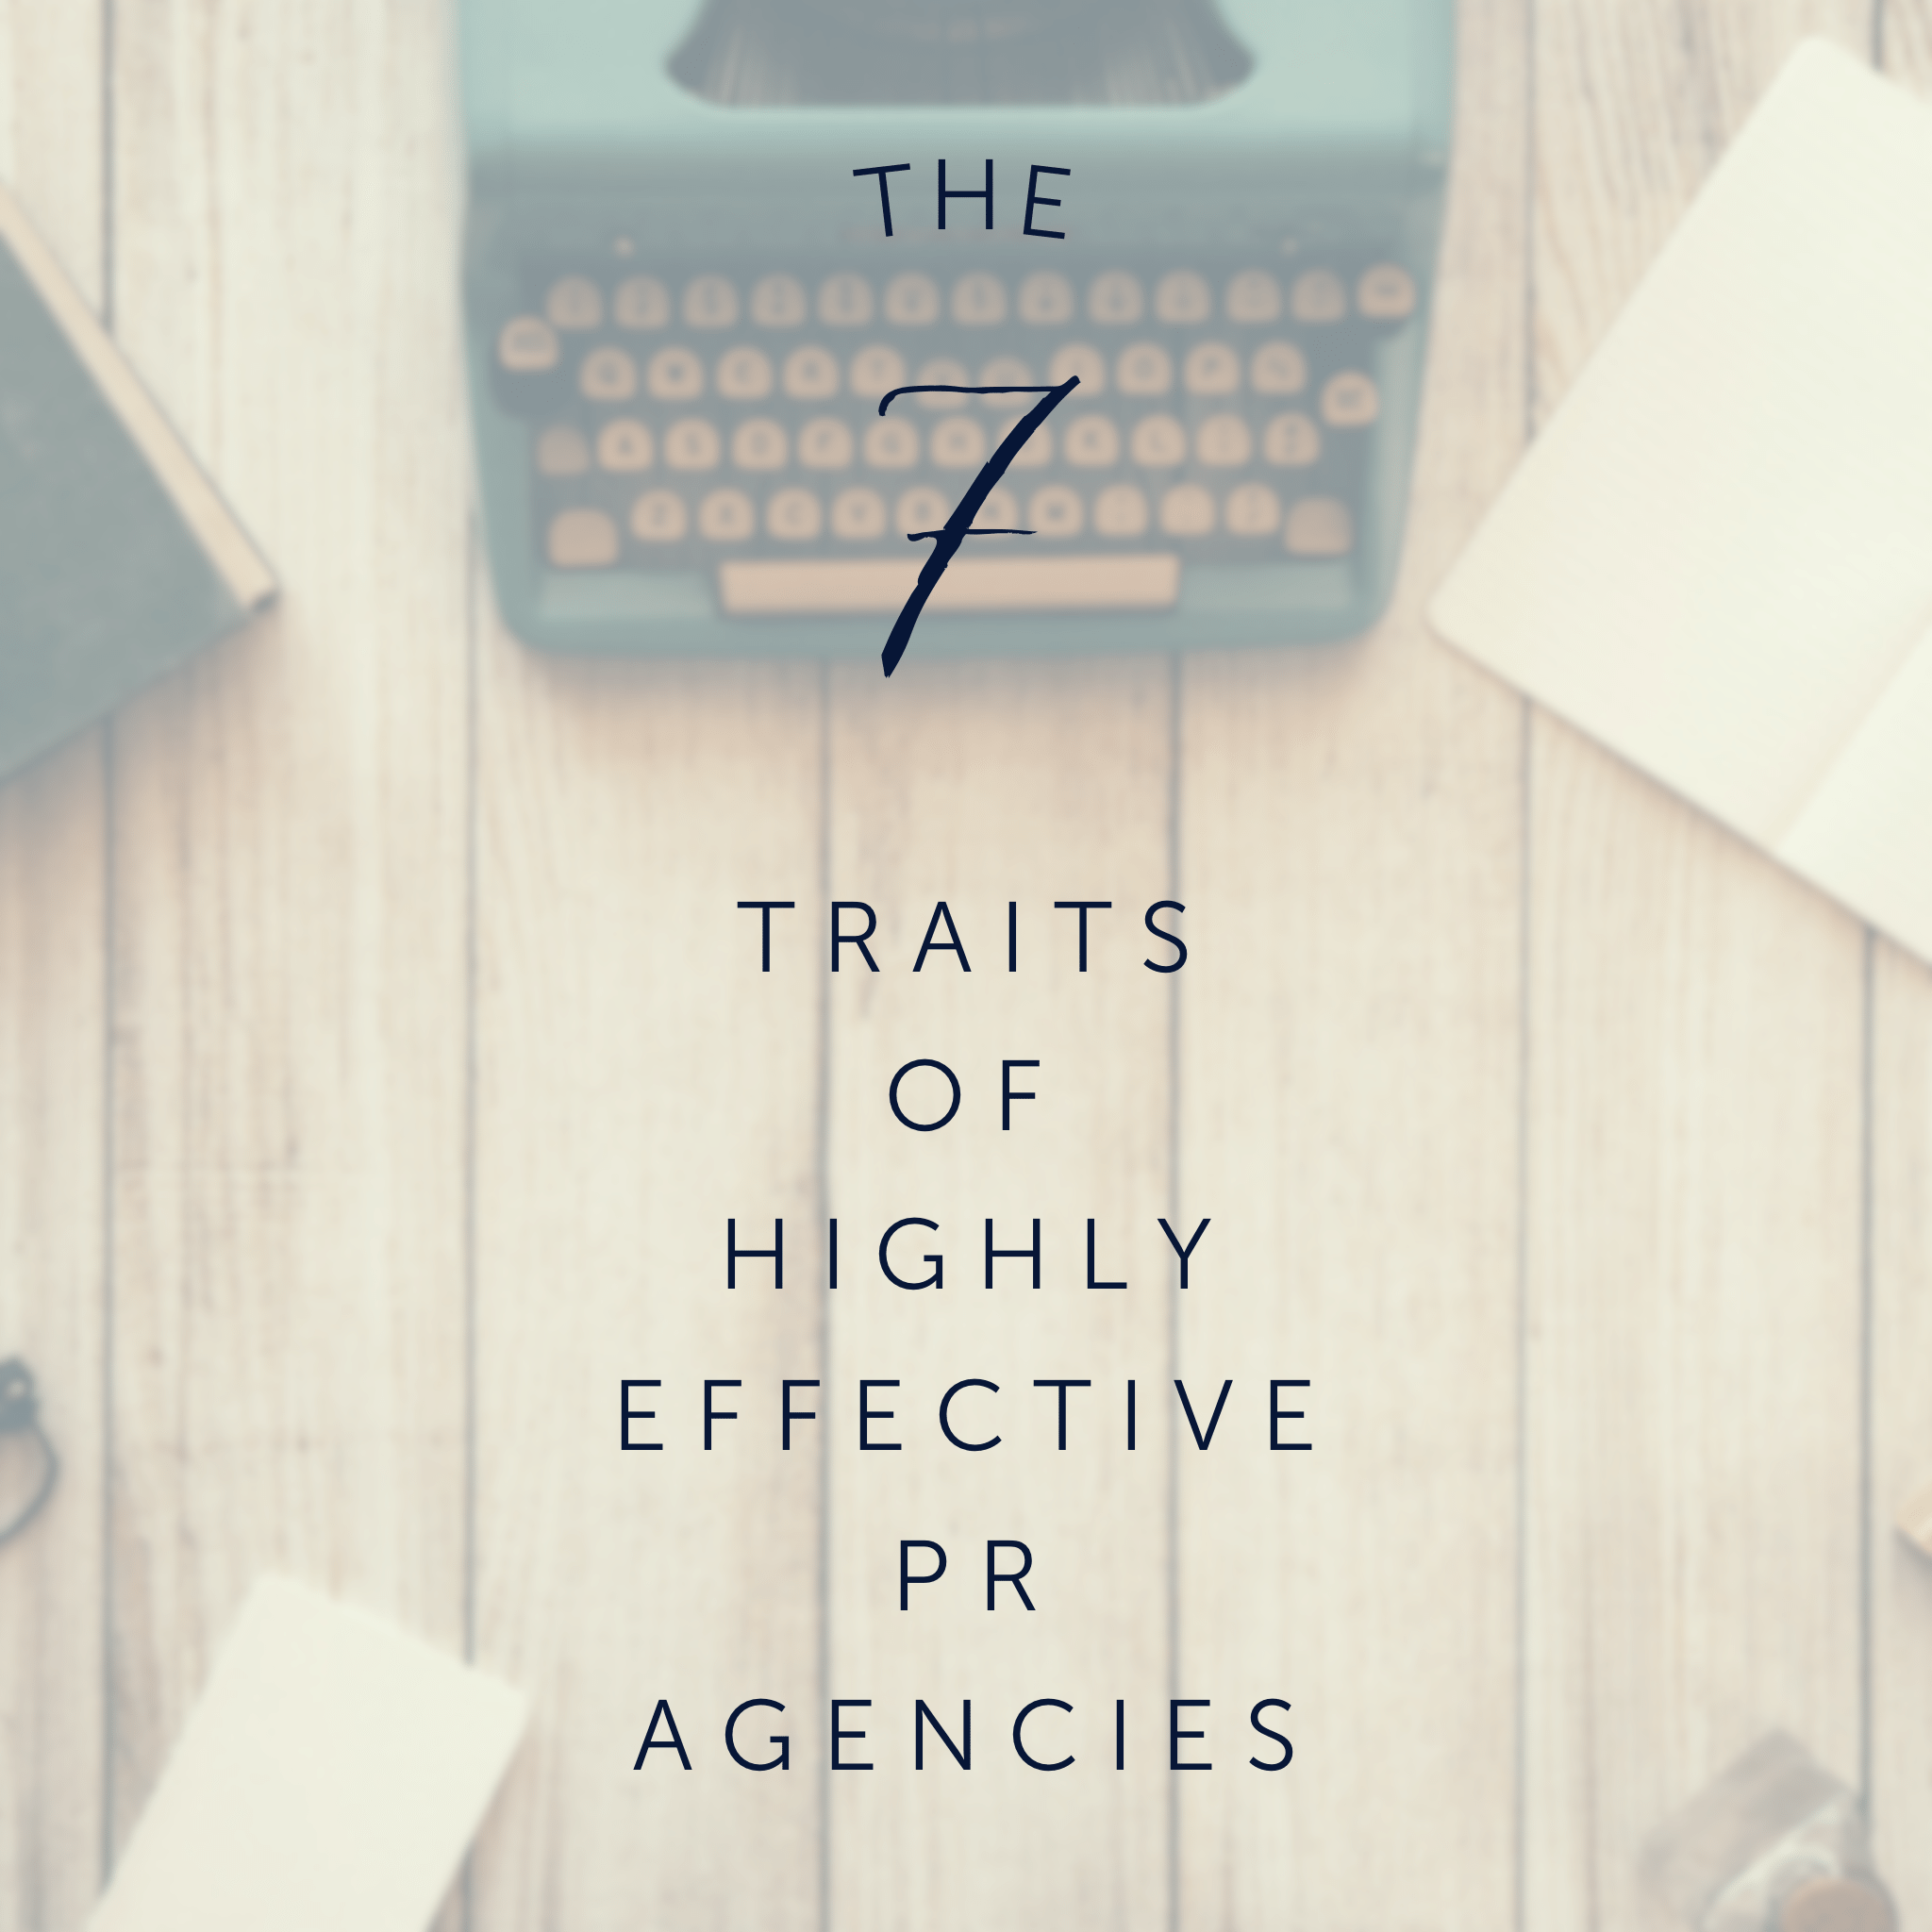 The seven traits of highly effective PR (public relations) agencies, by Good Business Consulting